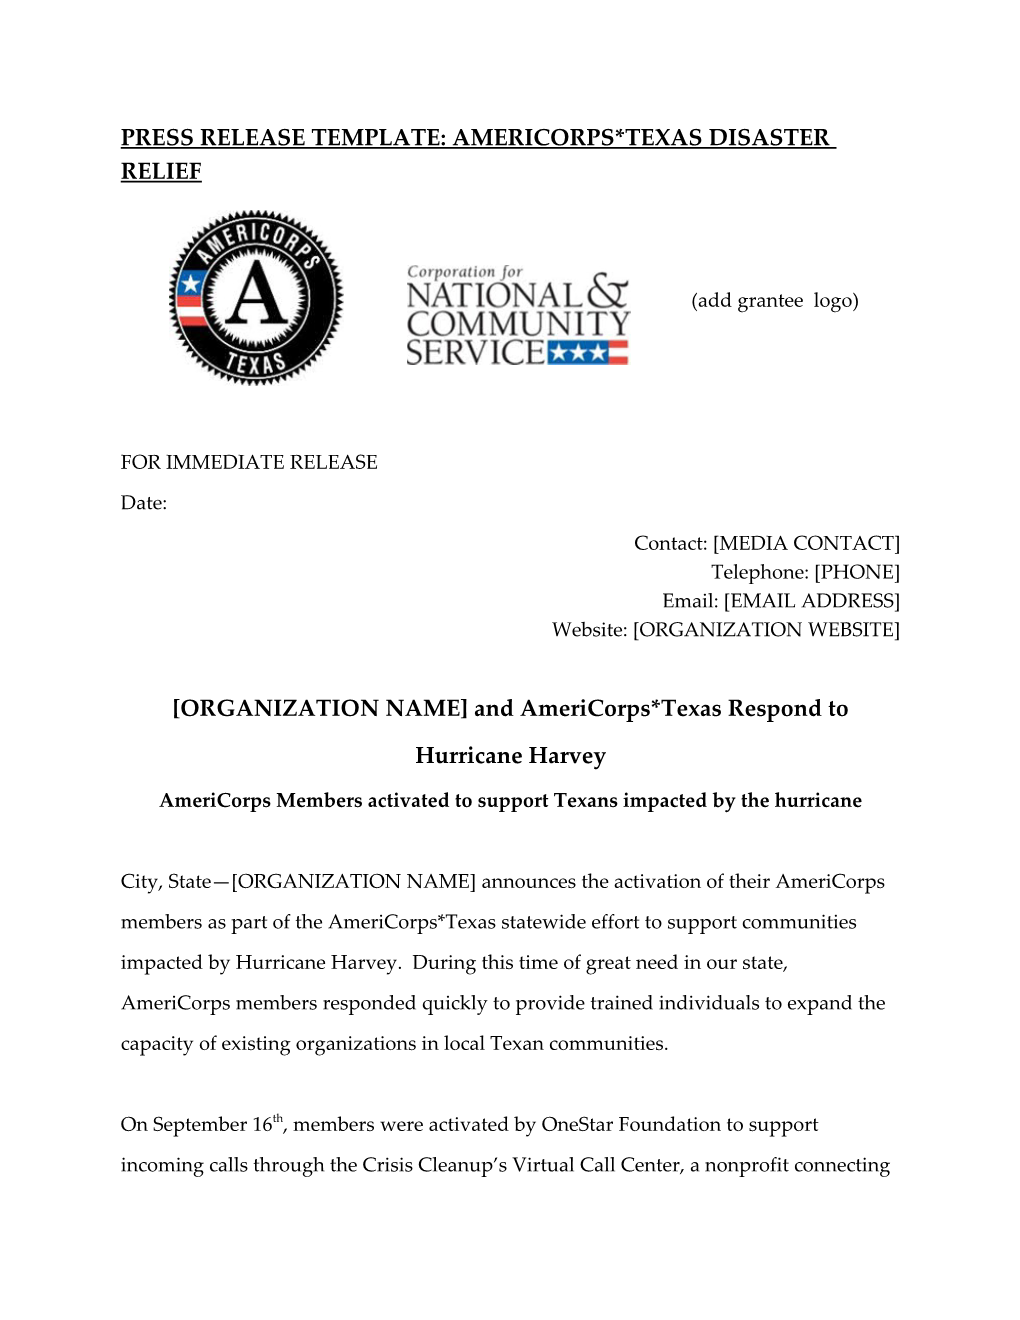 Press Release Template: Americorps*Texas Disaster Relief